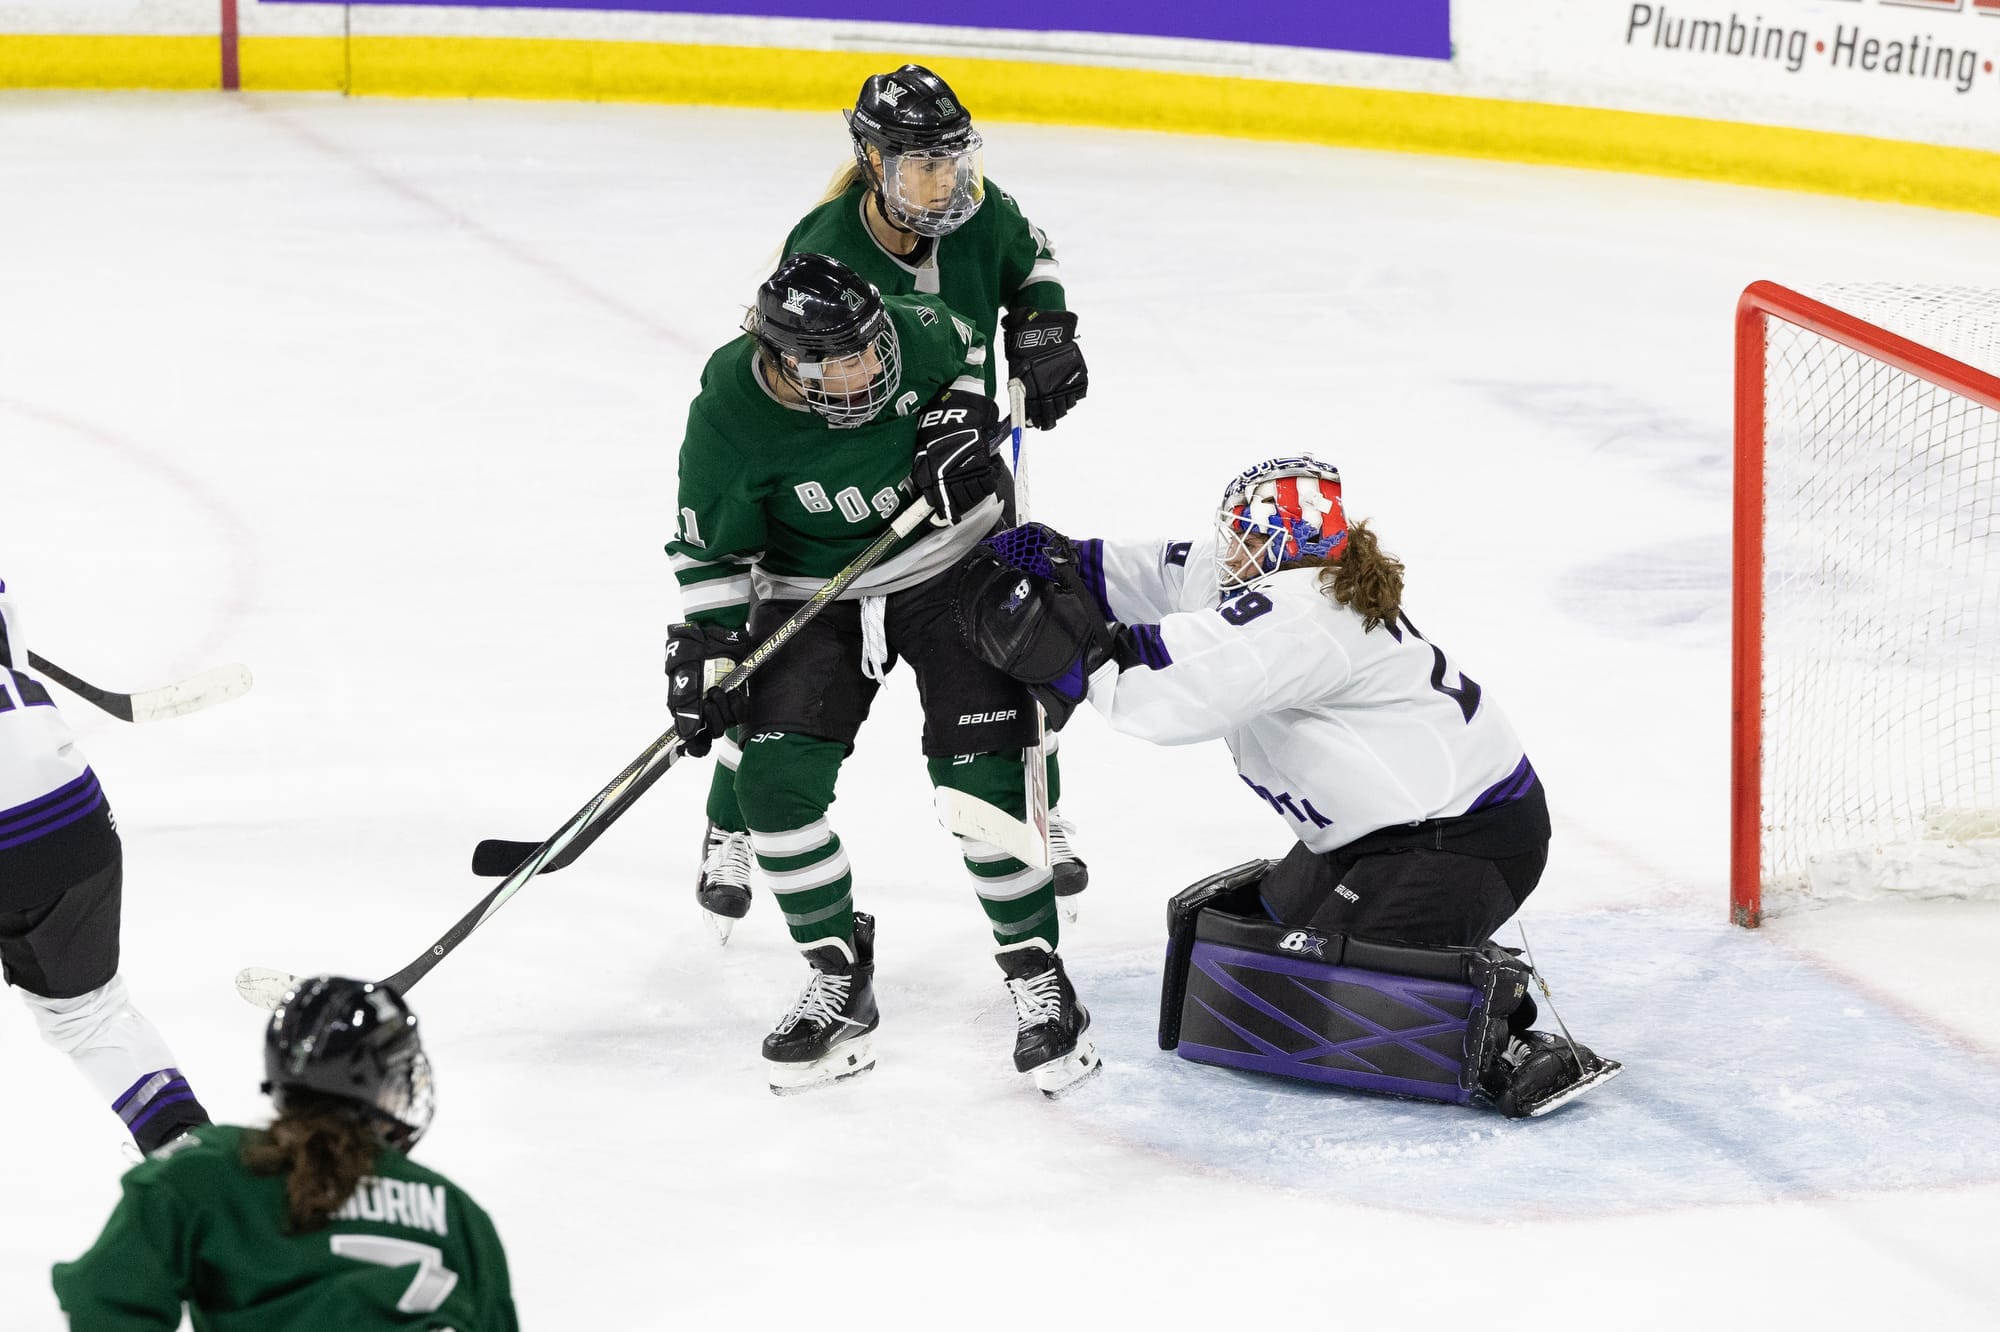 Hilary Knight, wearing a green home uniform tries to set up a screen in front of Minnesota's Nicole Hensley, wearing a white away uniform.